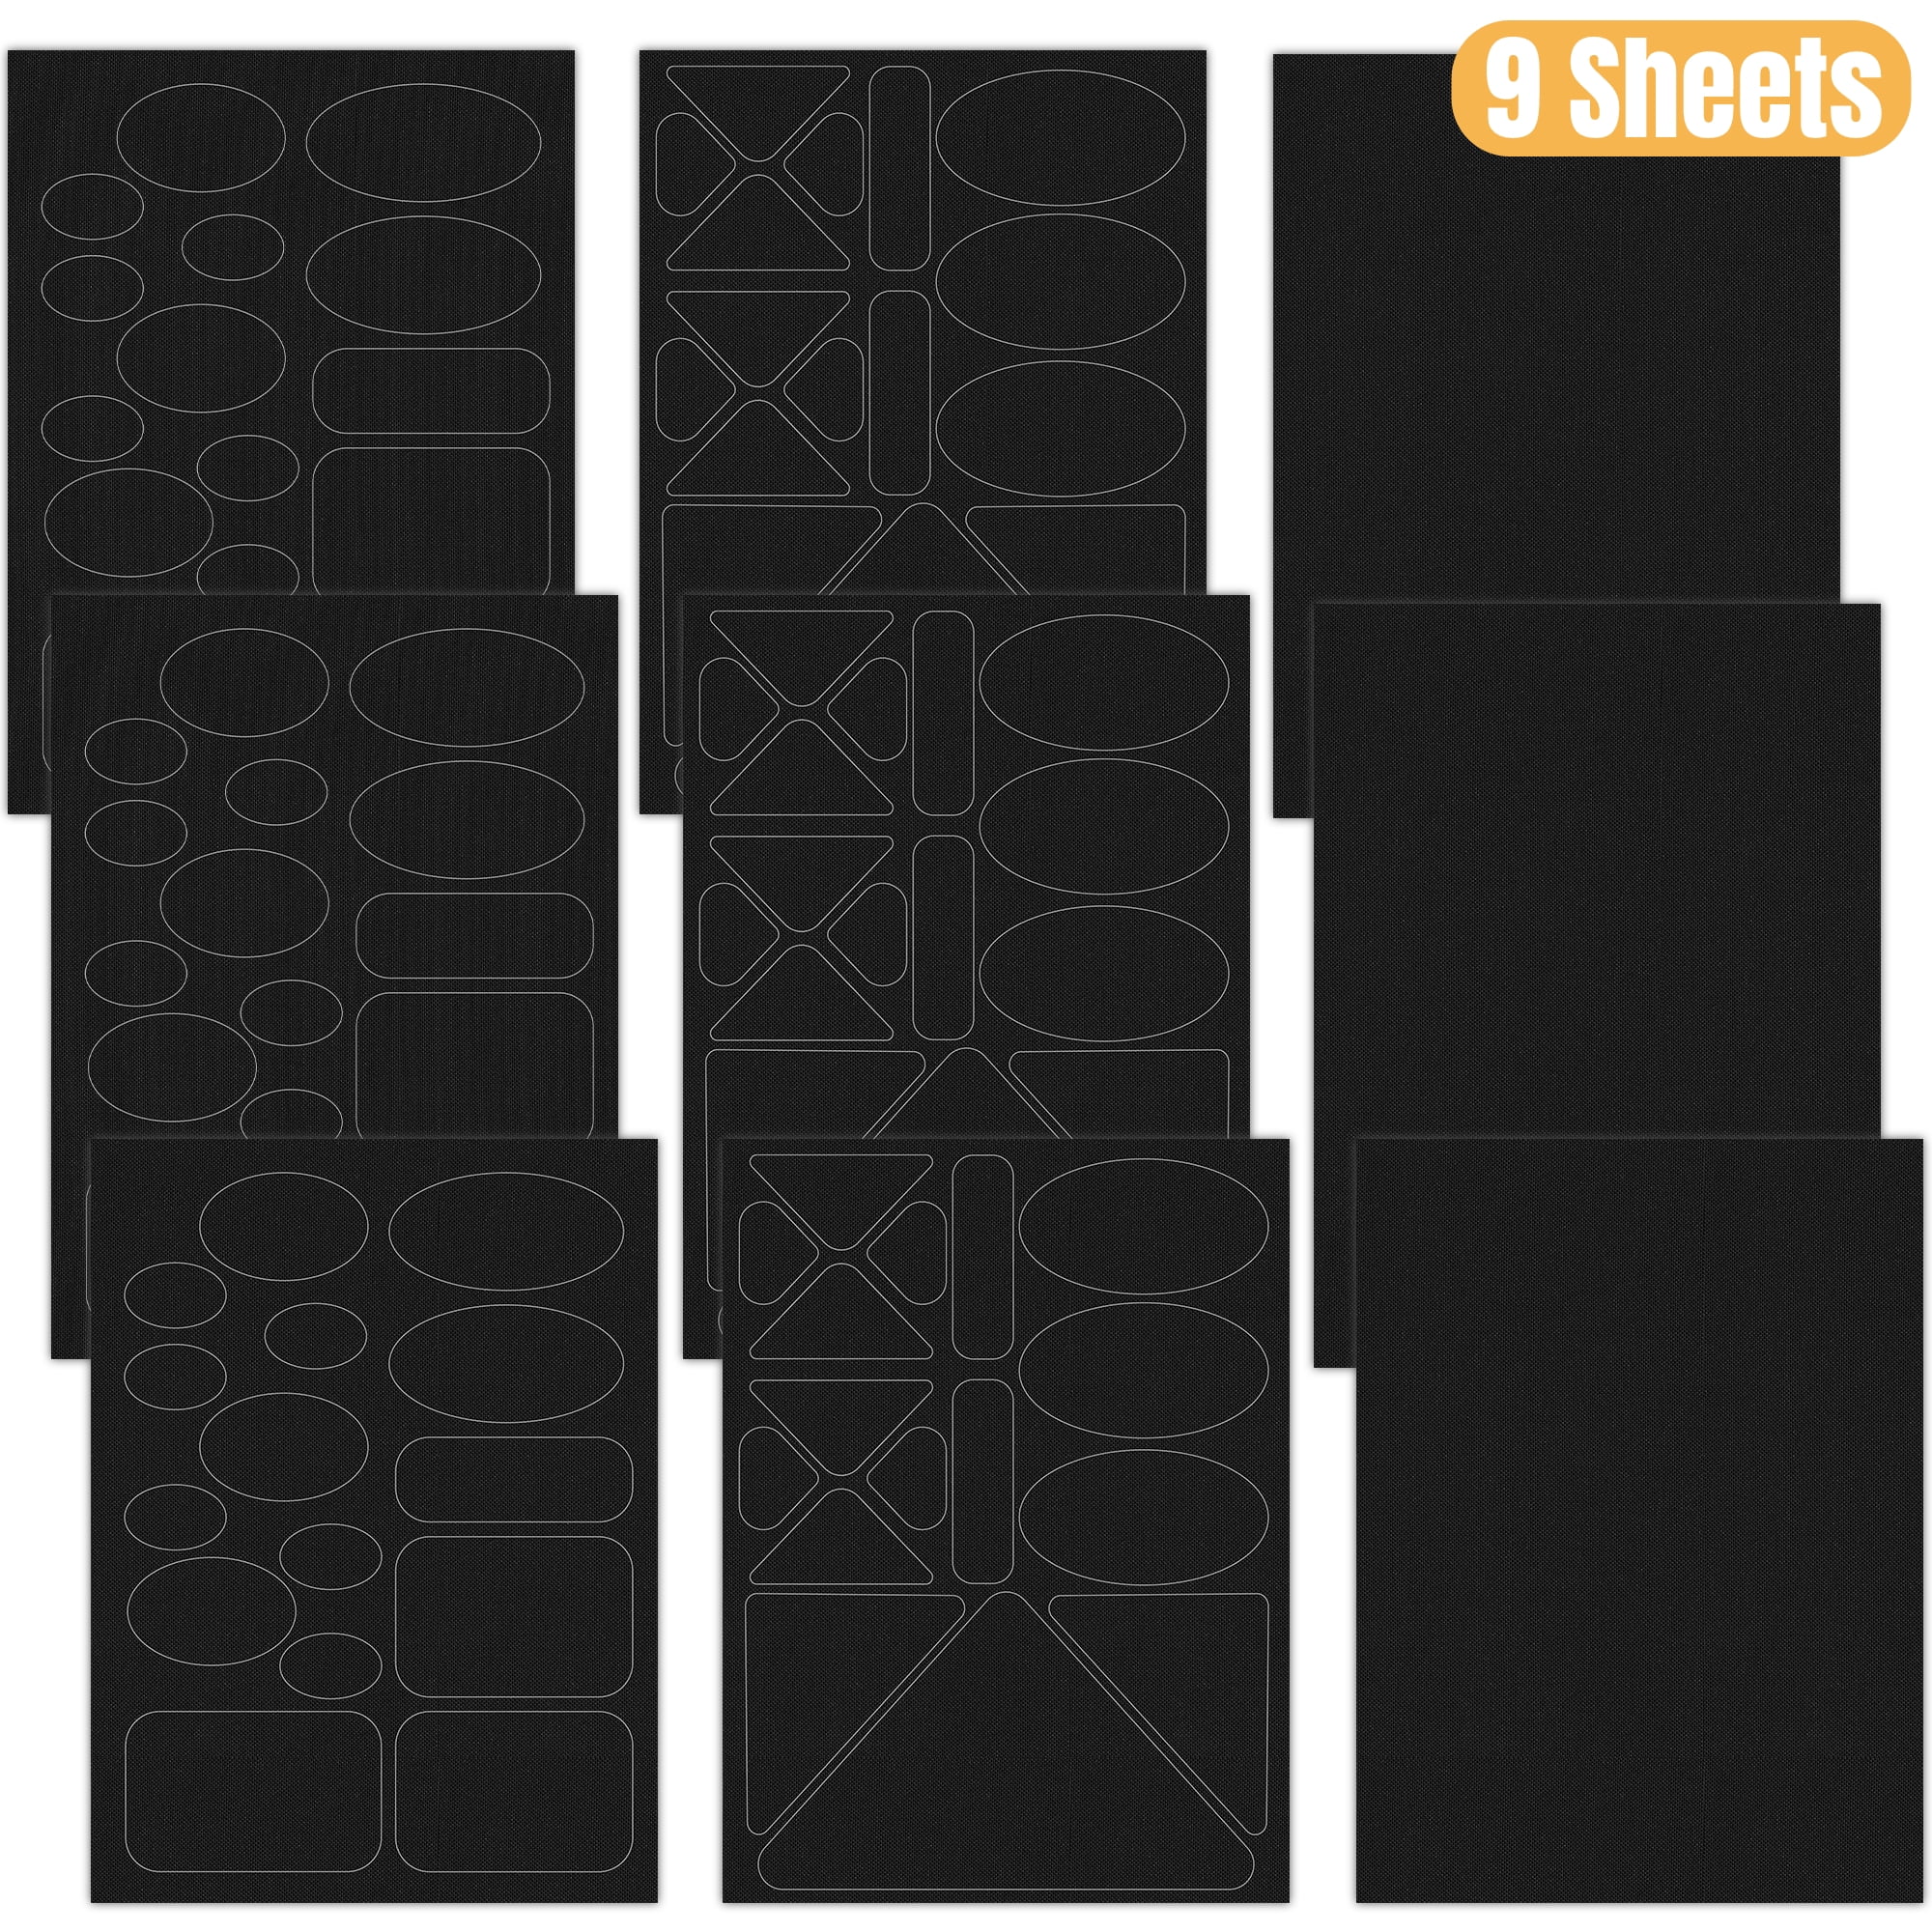 Wholesale Nbeads 9 Sheets Self-Adhesive Nylon Repair Patches 